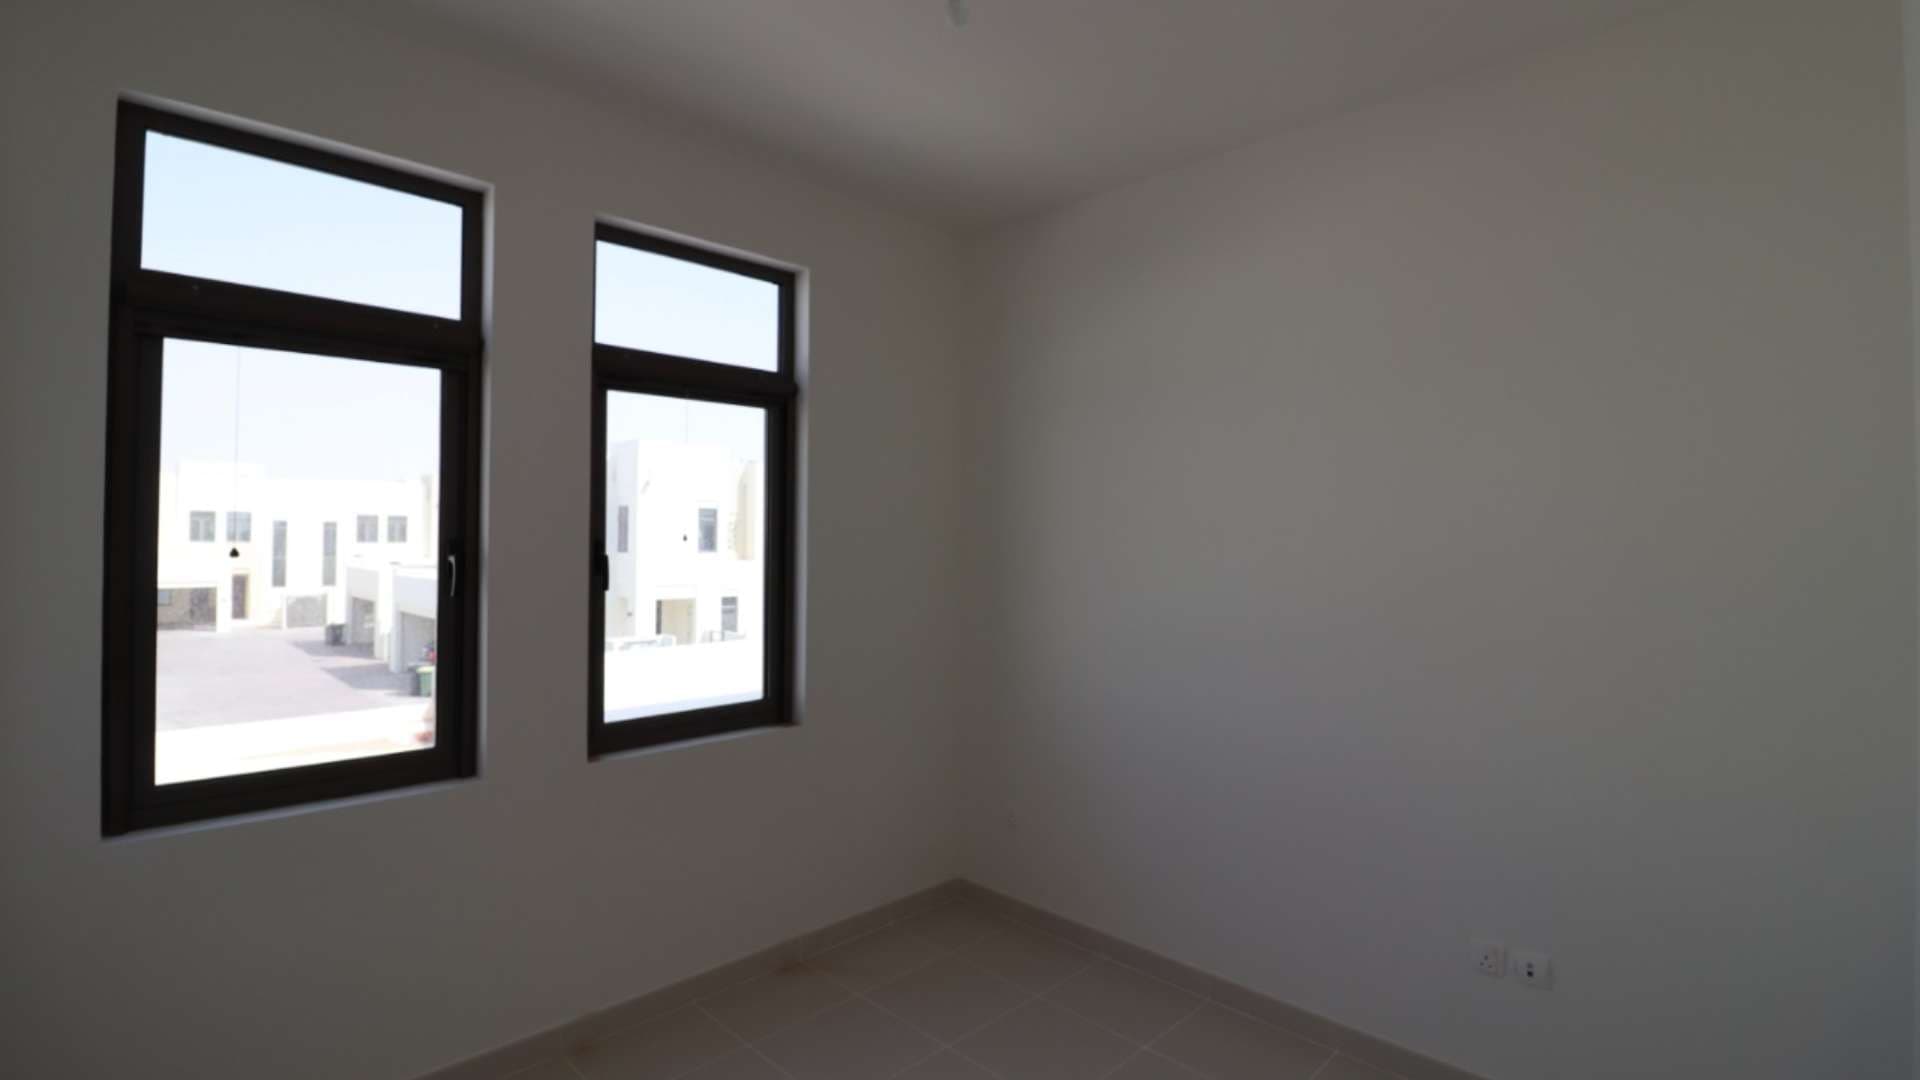 3 Bedroom Townhouse For Rent Mira Oasis Lp08120 24f0c2b560a6f2.jpeg